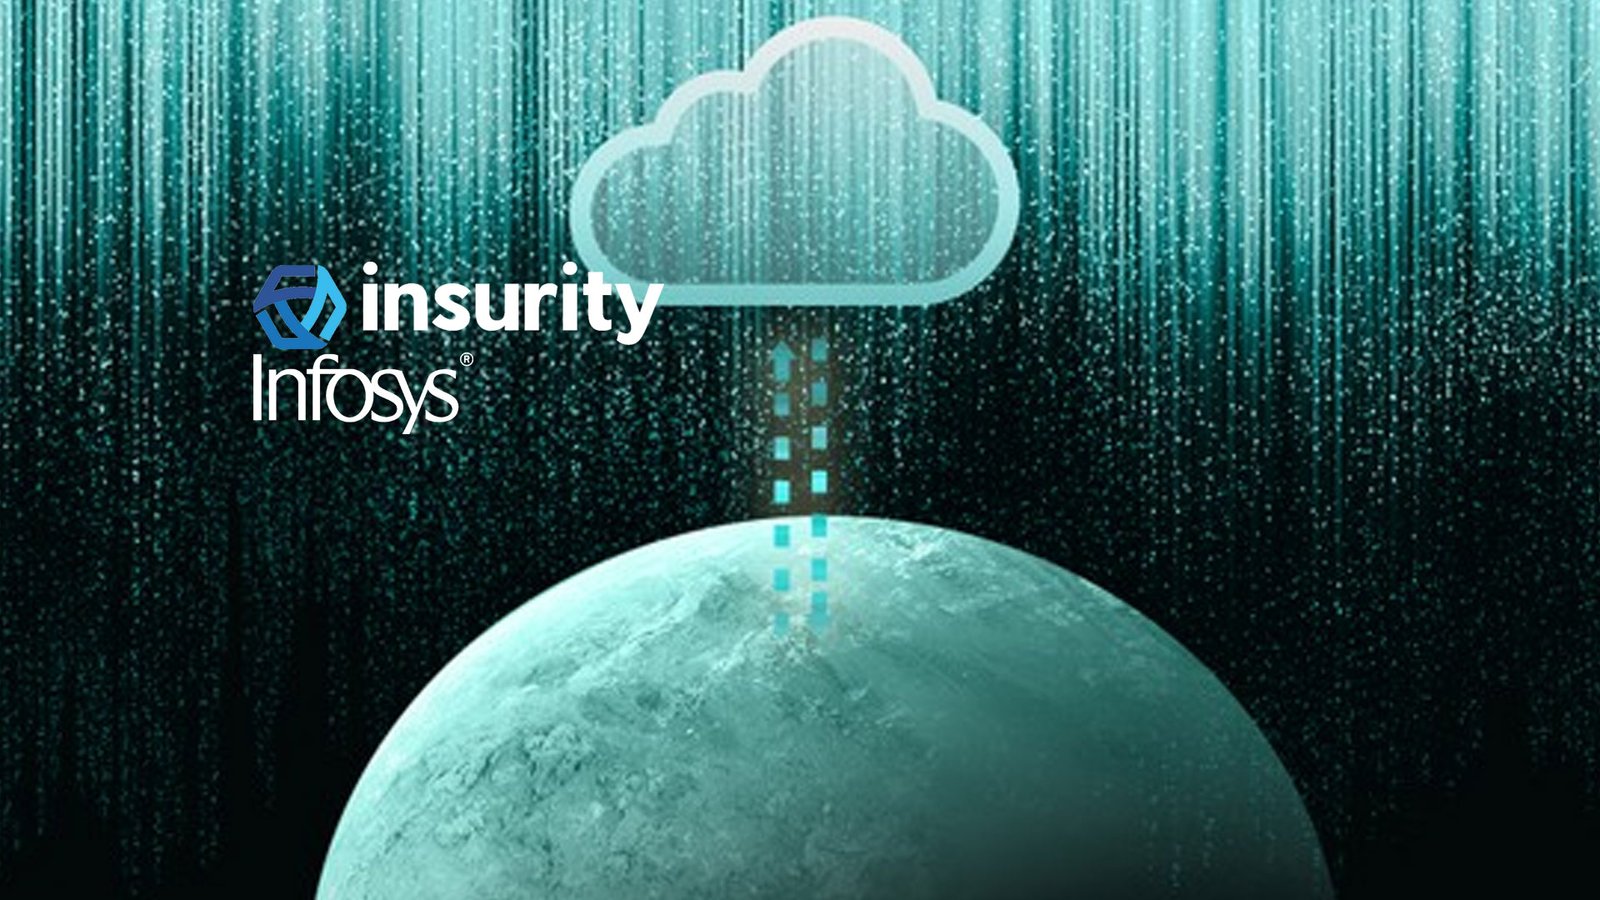 Cloud-based Software Insurity Announces New Alliance with Infosys | AI